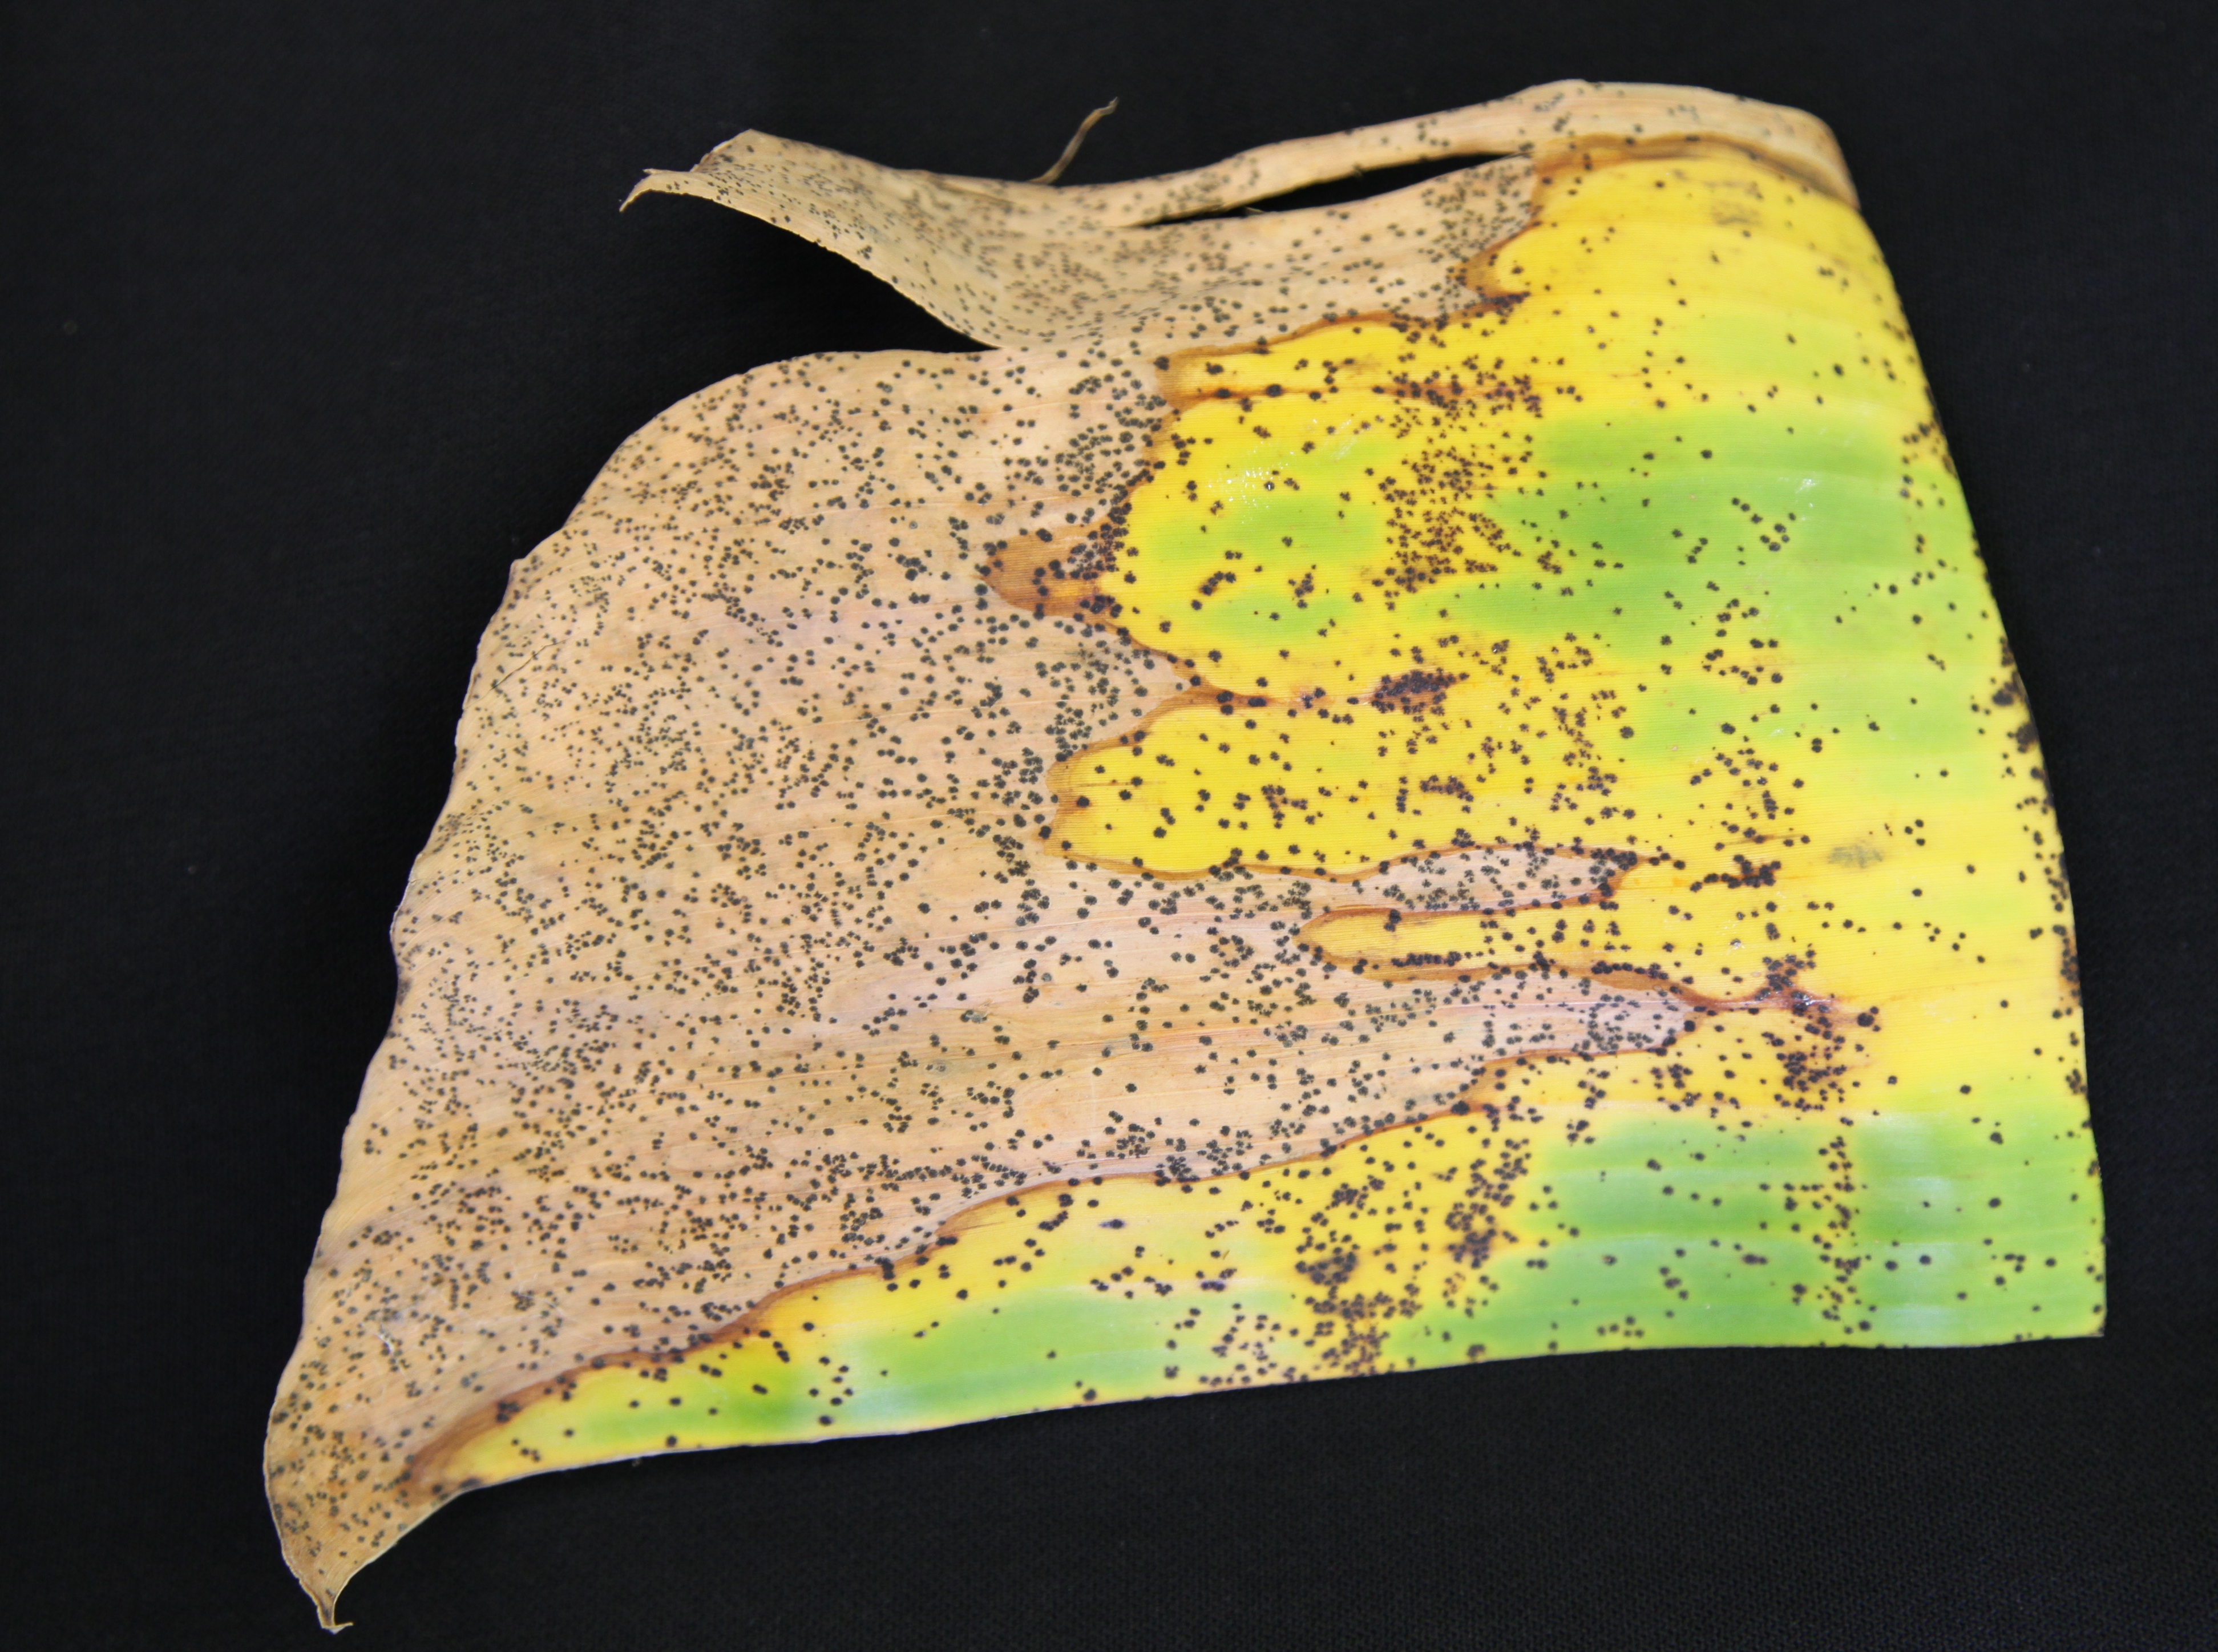 Section of banana leaf with large patch that has browned with yellow margins. Whole leaf is covered in brown fungal spots